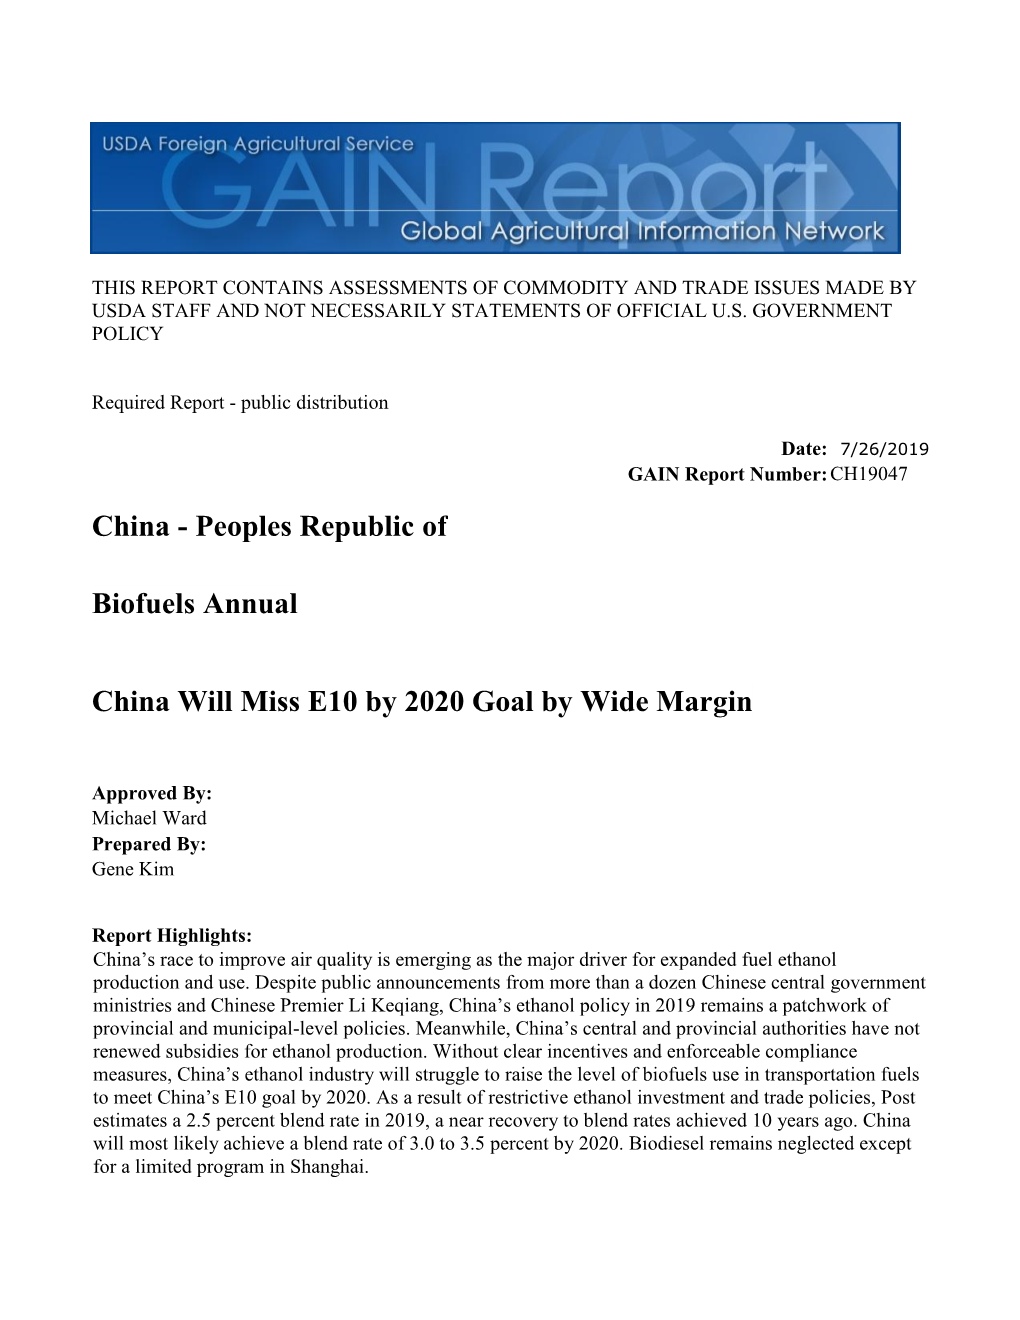 Peoples Republic of Biofuels Annual China Will Miss E10 by 2020 Goal